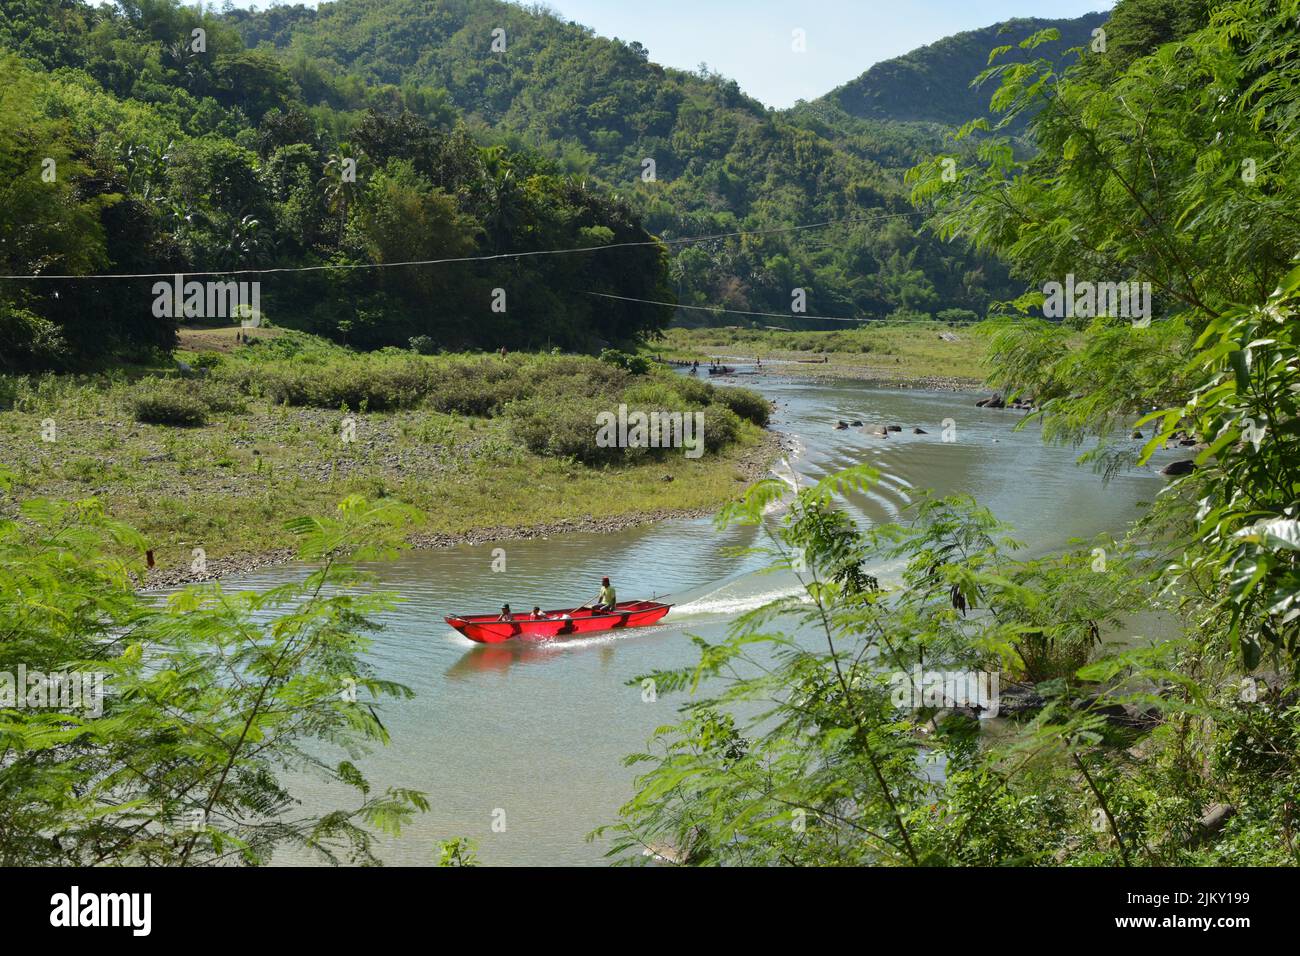 A small red motor boat red motor boat in the Wawa River, Rizal, Philippines Stock Photo